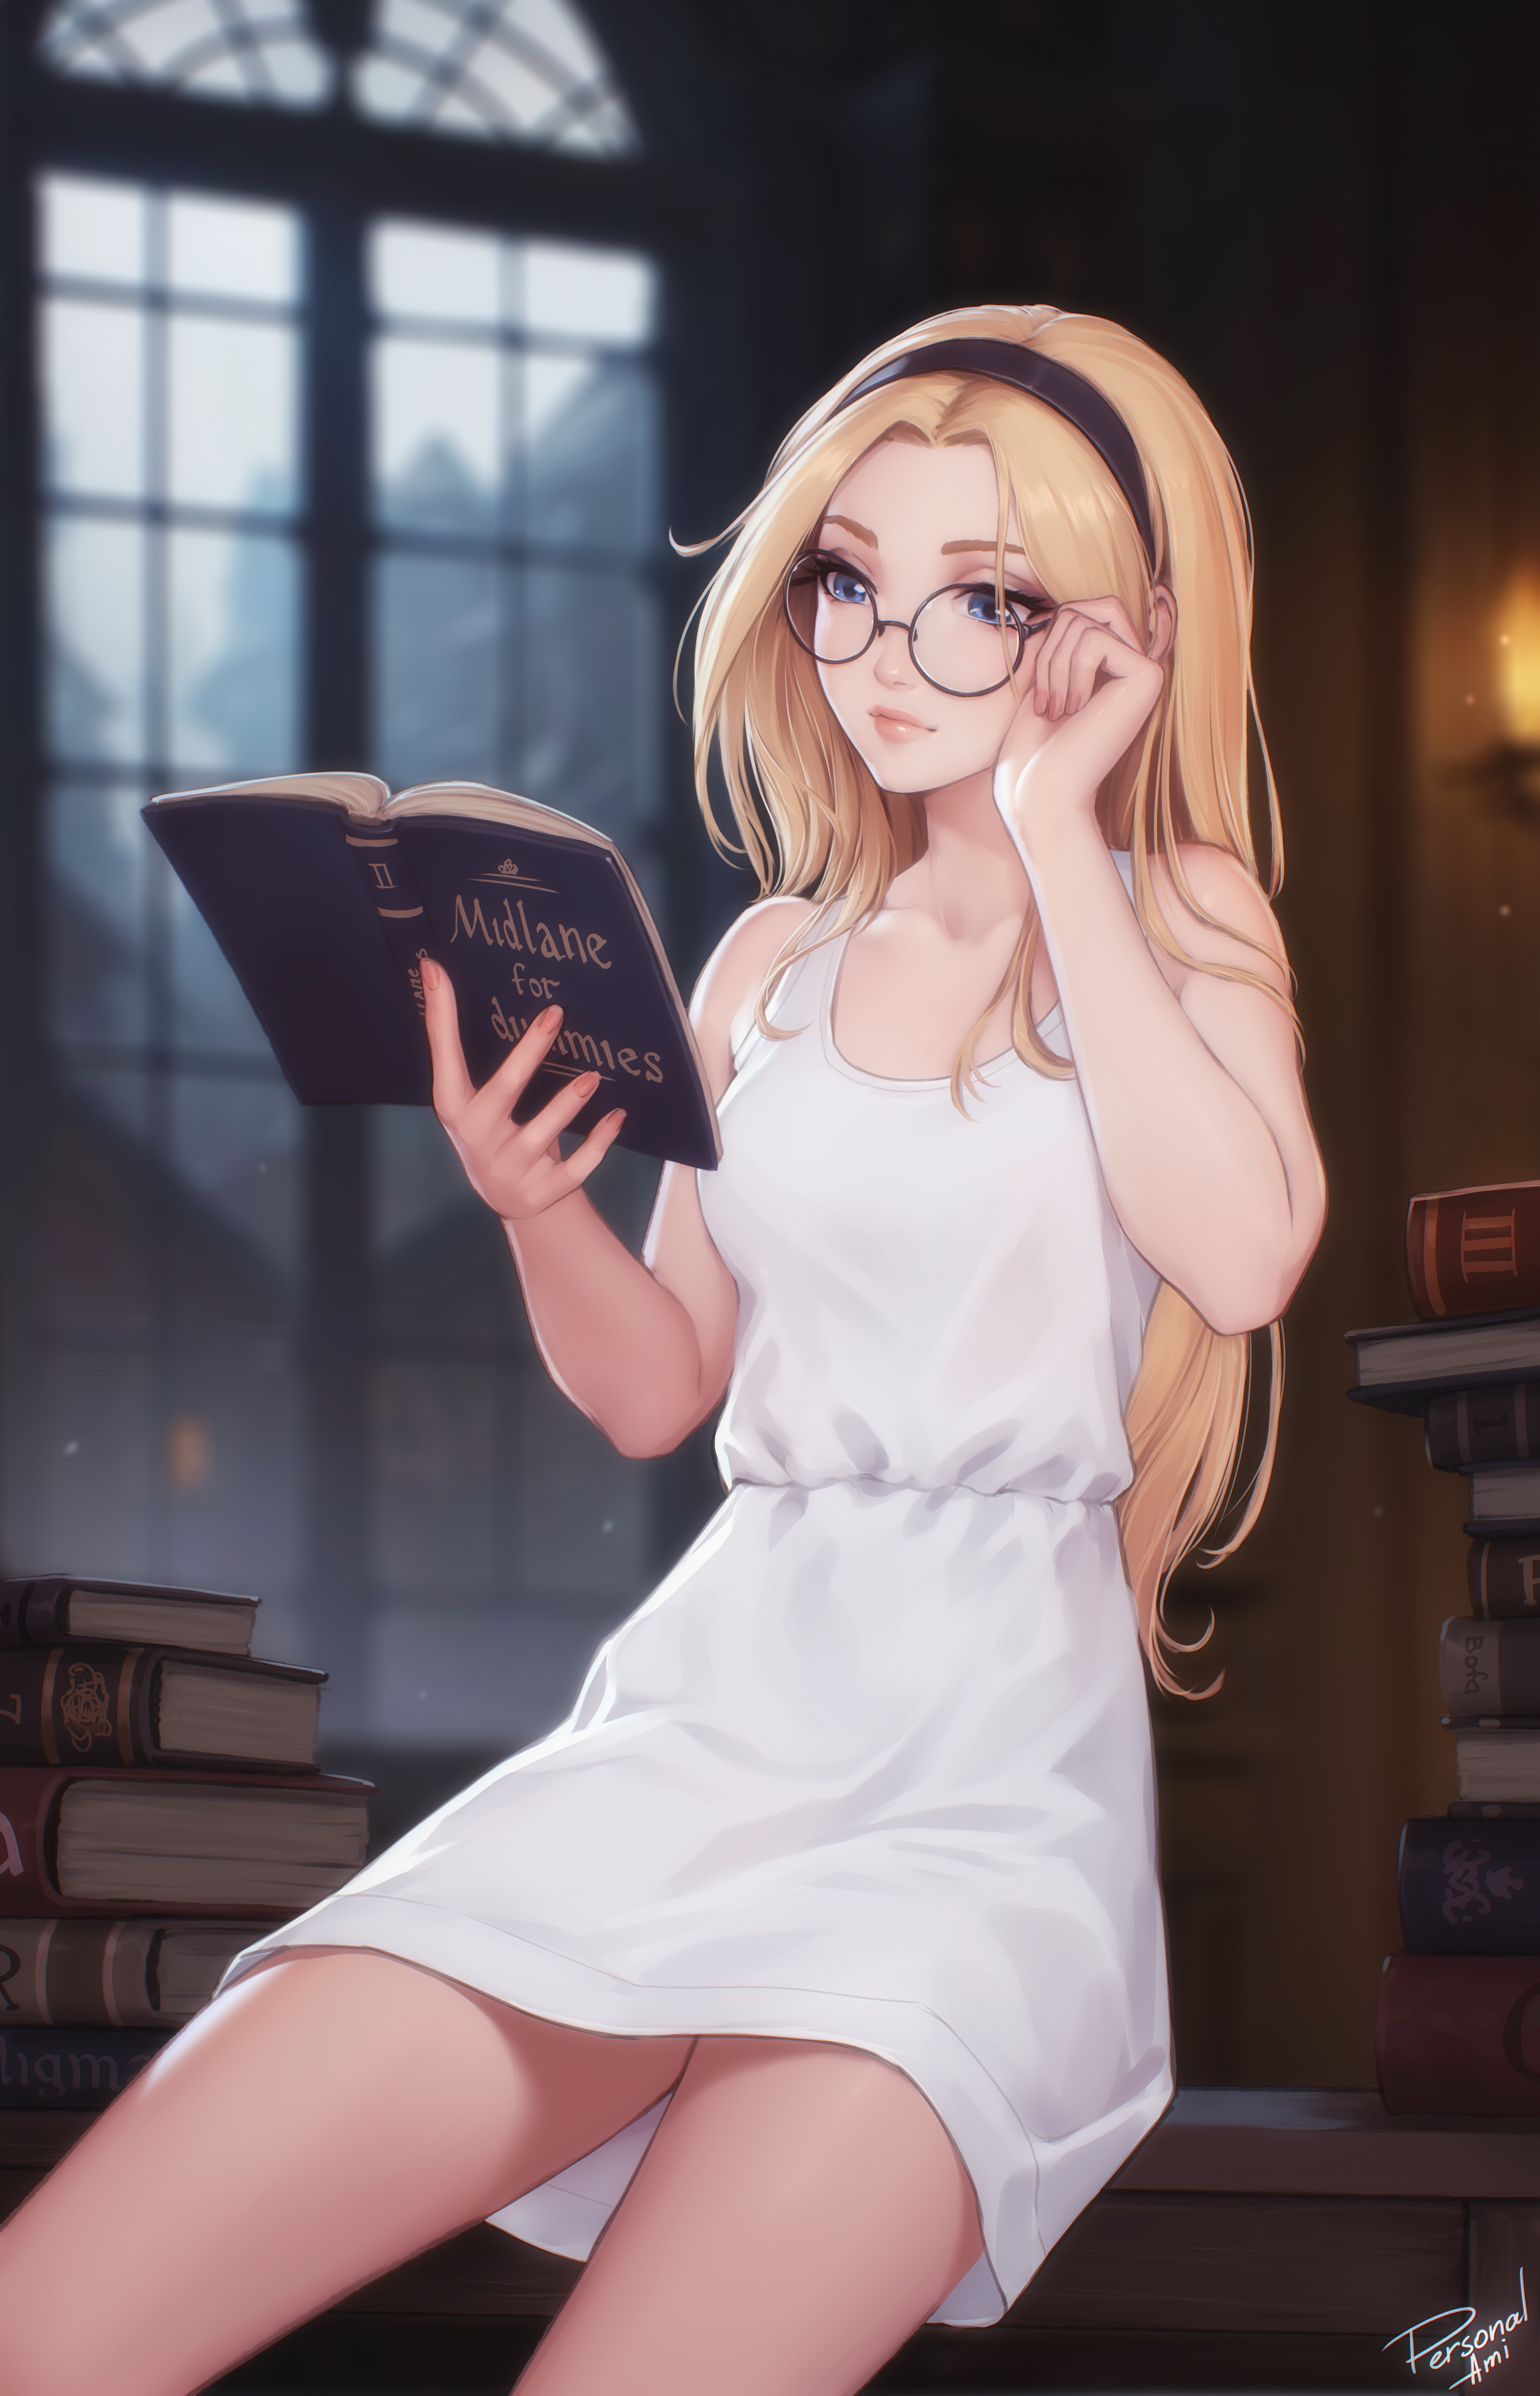 General 4500x7000 Lux (League of Legends) League of Legends video games video game girls video game characters books reading artwork drawing fan art Personal ami dress white dress women with glasses sitting book in hand blue eyes watermarked